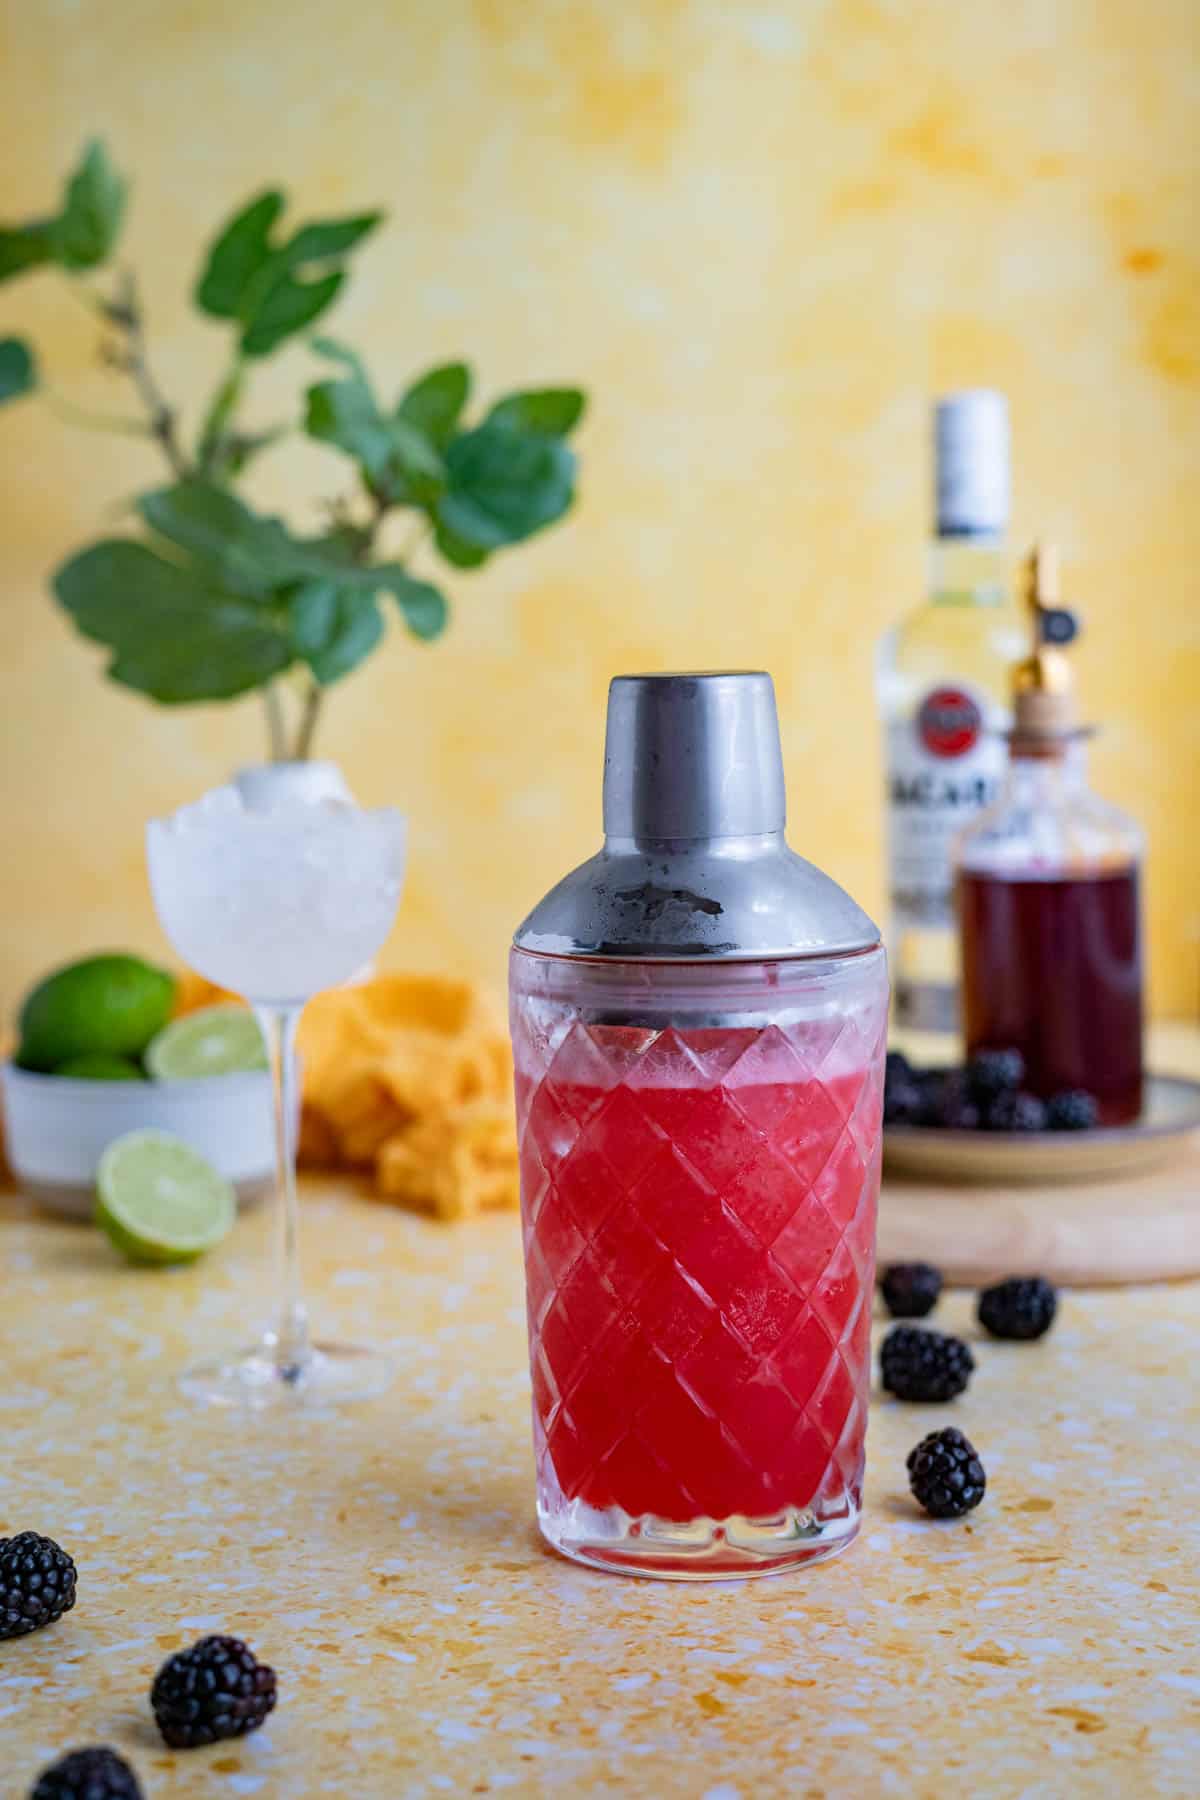 A cocktail shaker filled with a blackberry daiquiri recipe sits on a yellow countertop.